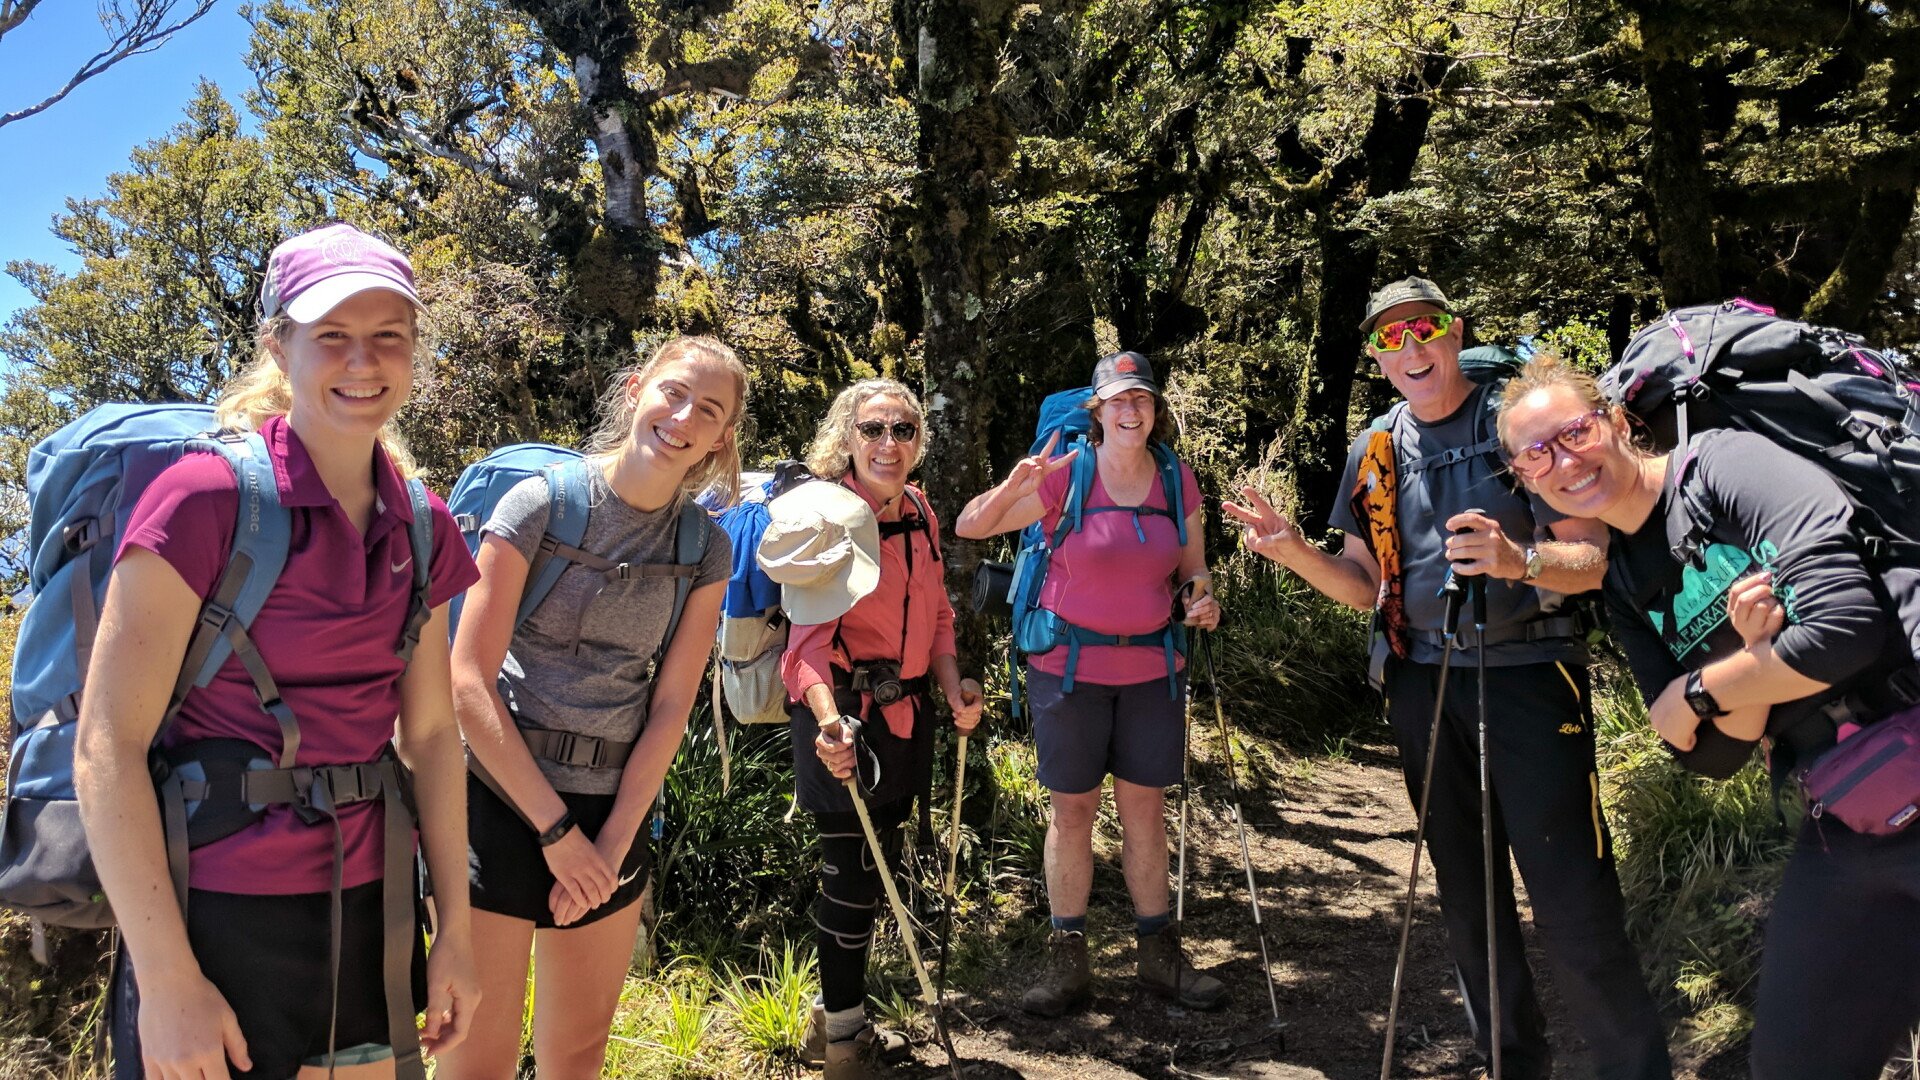 The kiwi-style hiking trips have young people of all ages.